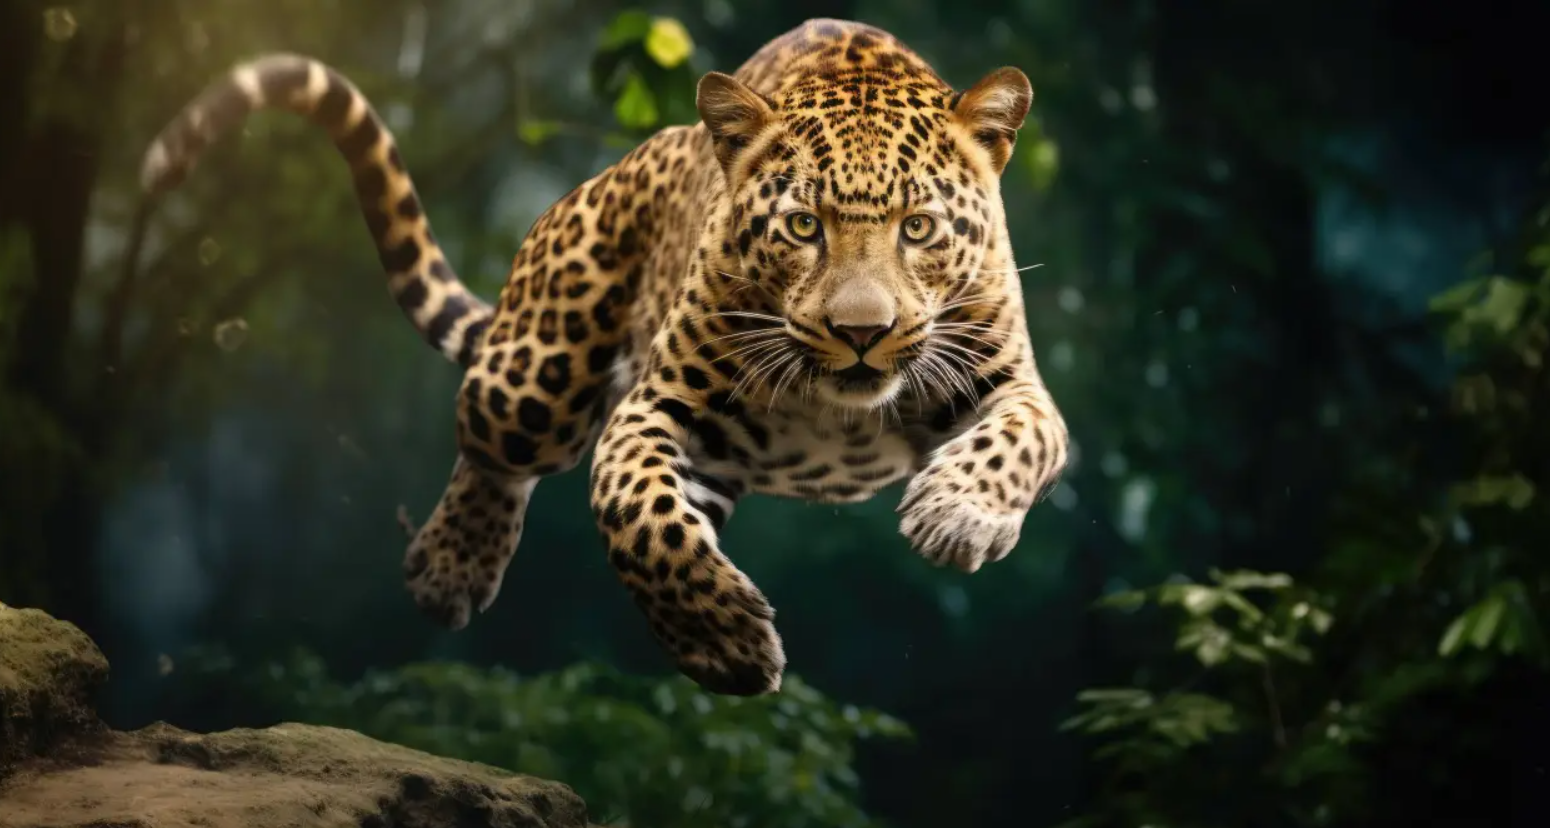 A leopard jumping in the air

Description automatically generated